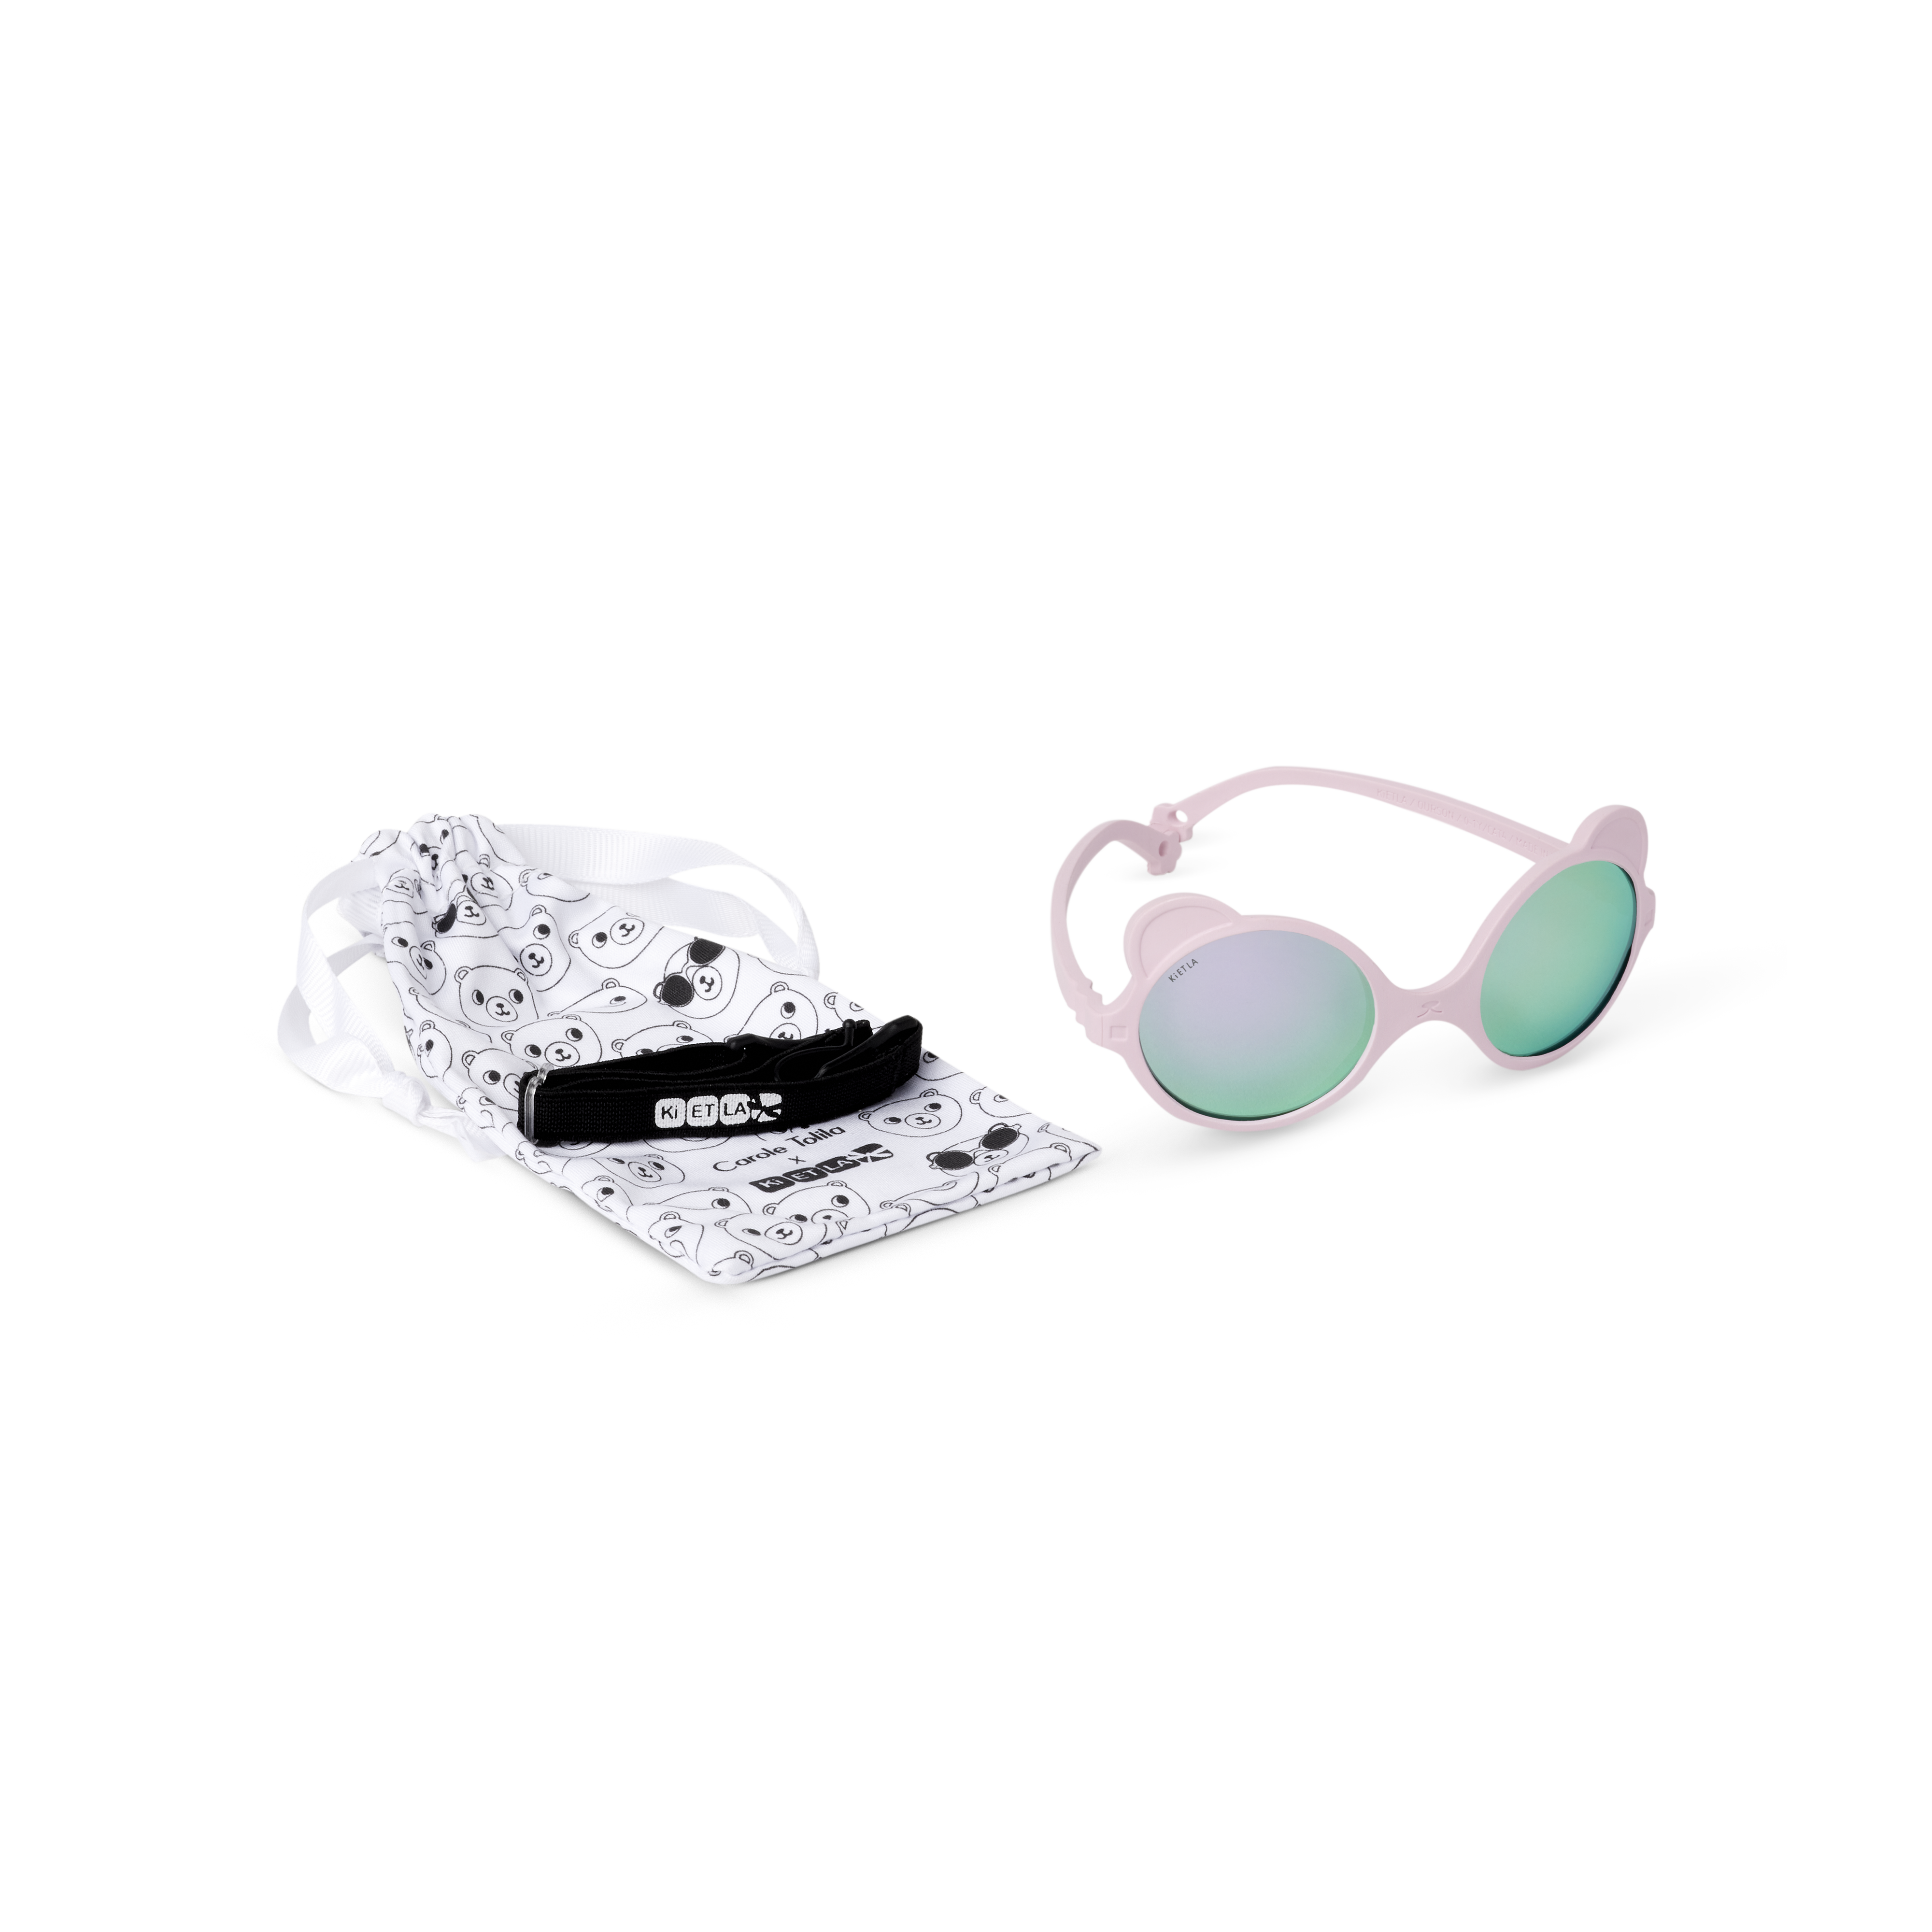 Sunglasses, 1-2 years Ourson Pale pink